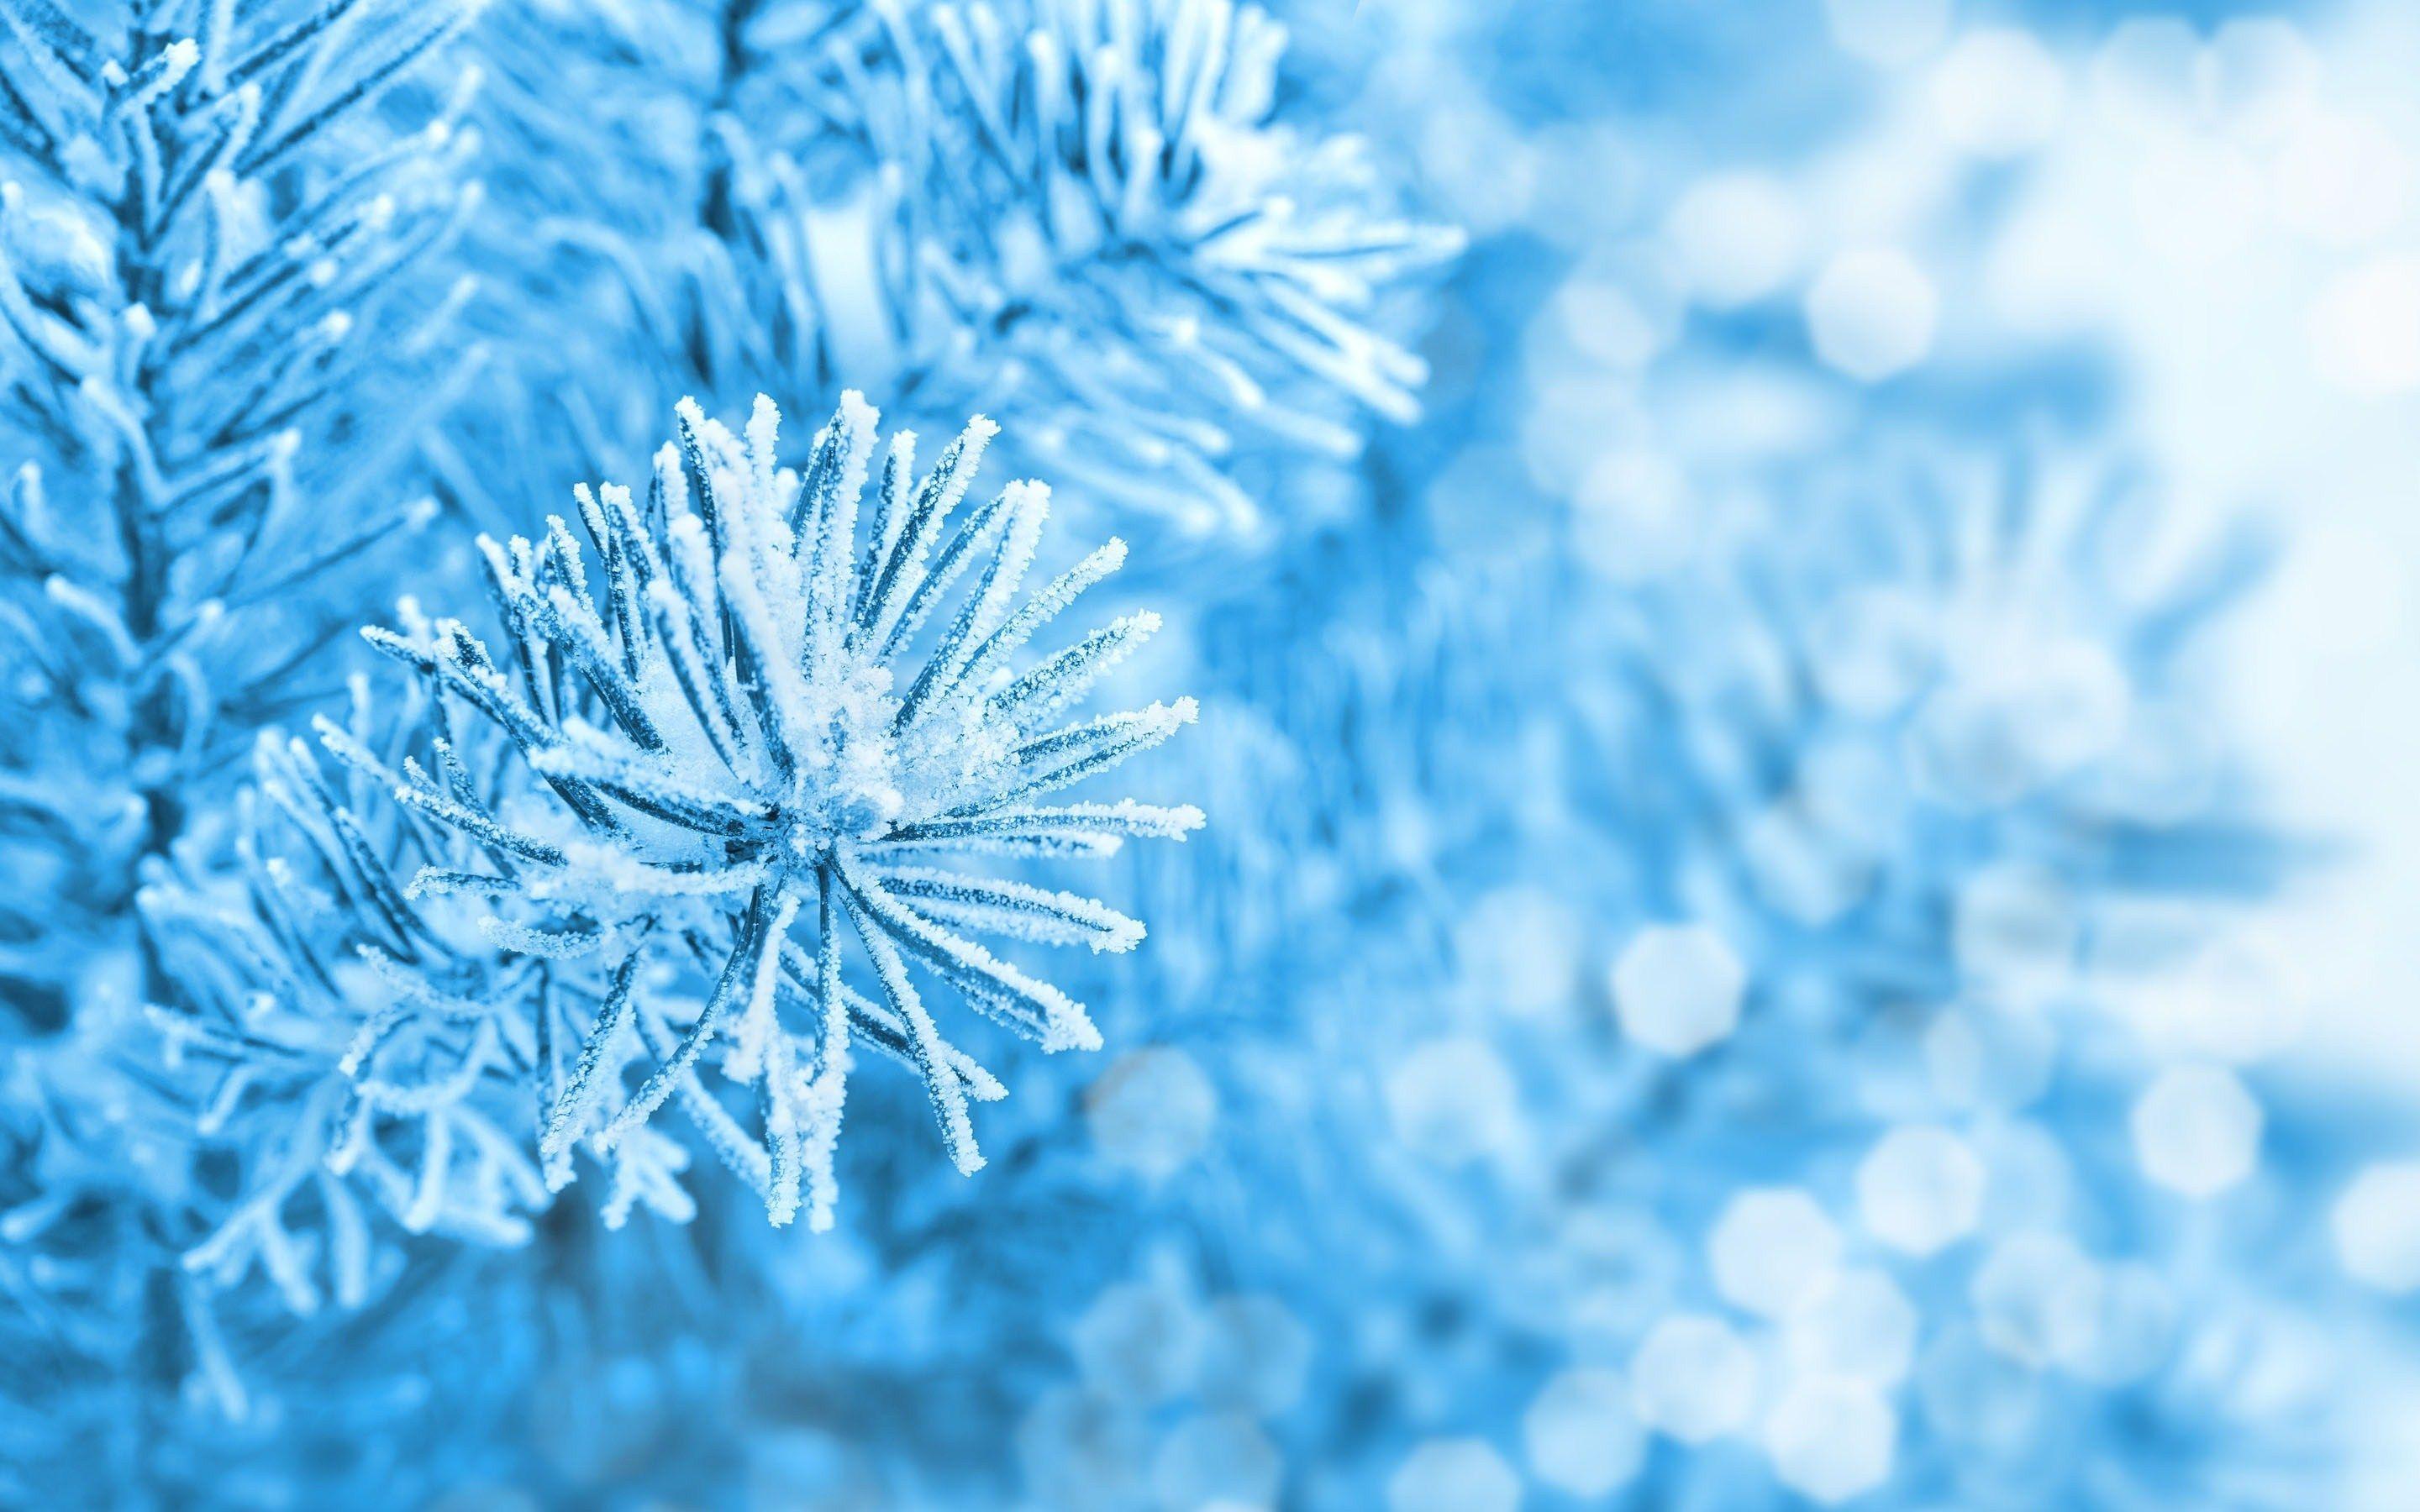 A close up of some blue branches - Ice